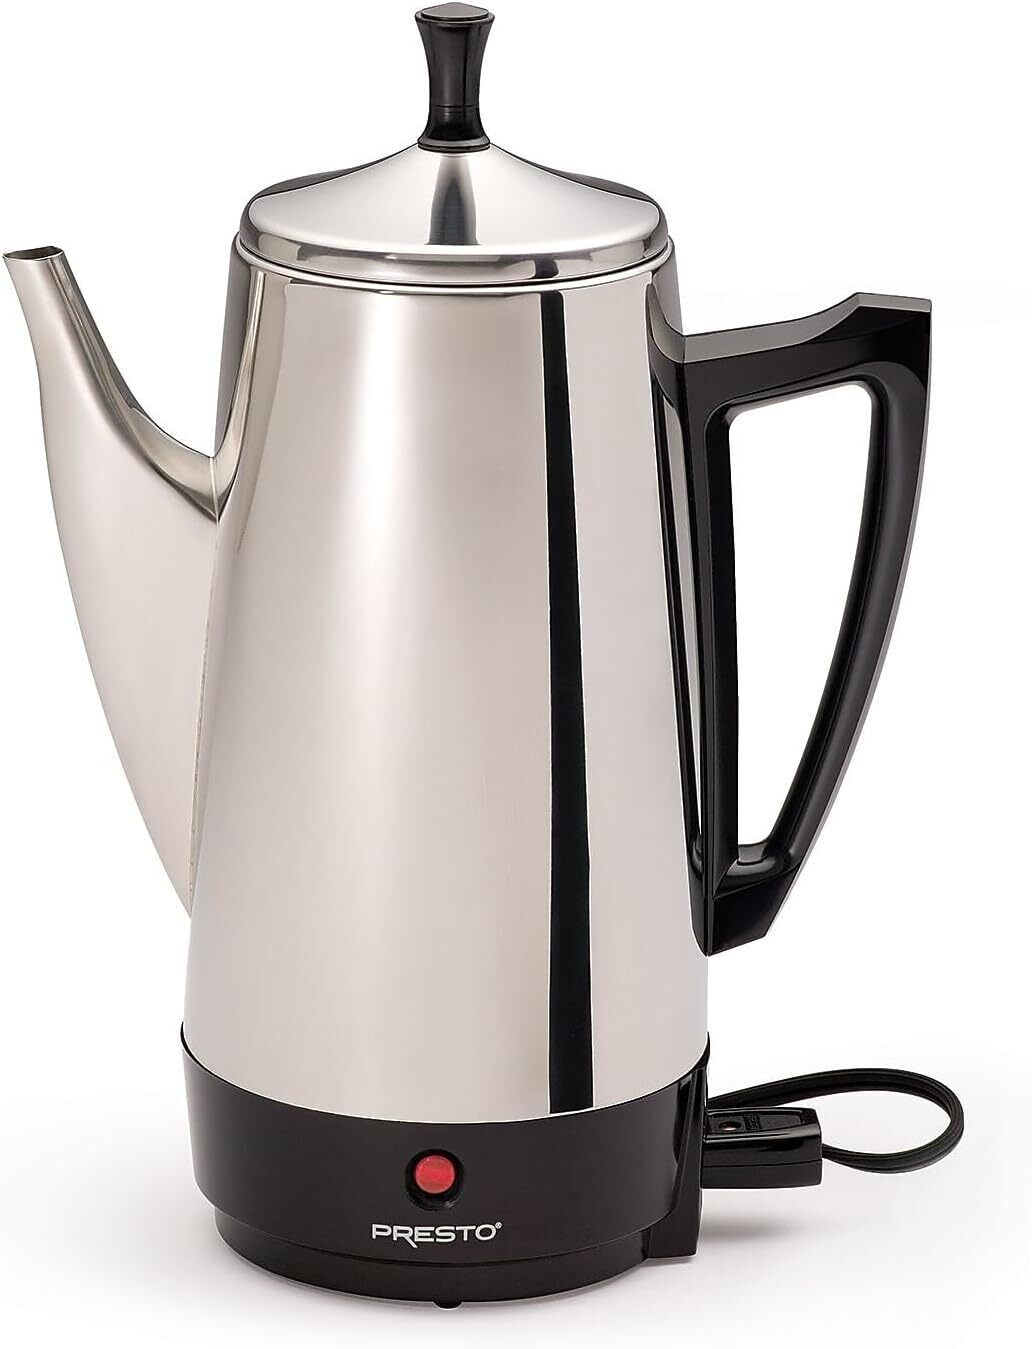 Stainless-Steel Electric Coffee Percolator, 12-Cups, Black